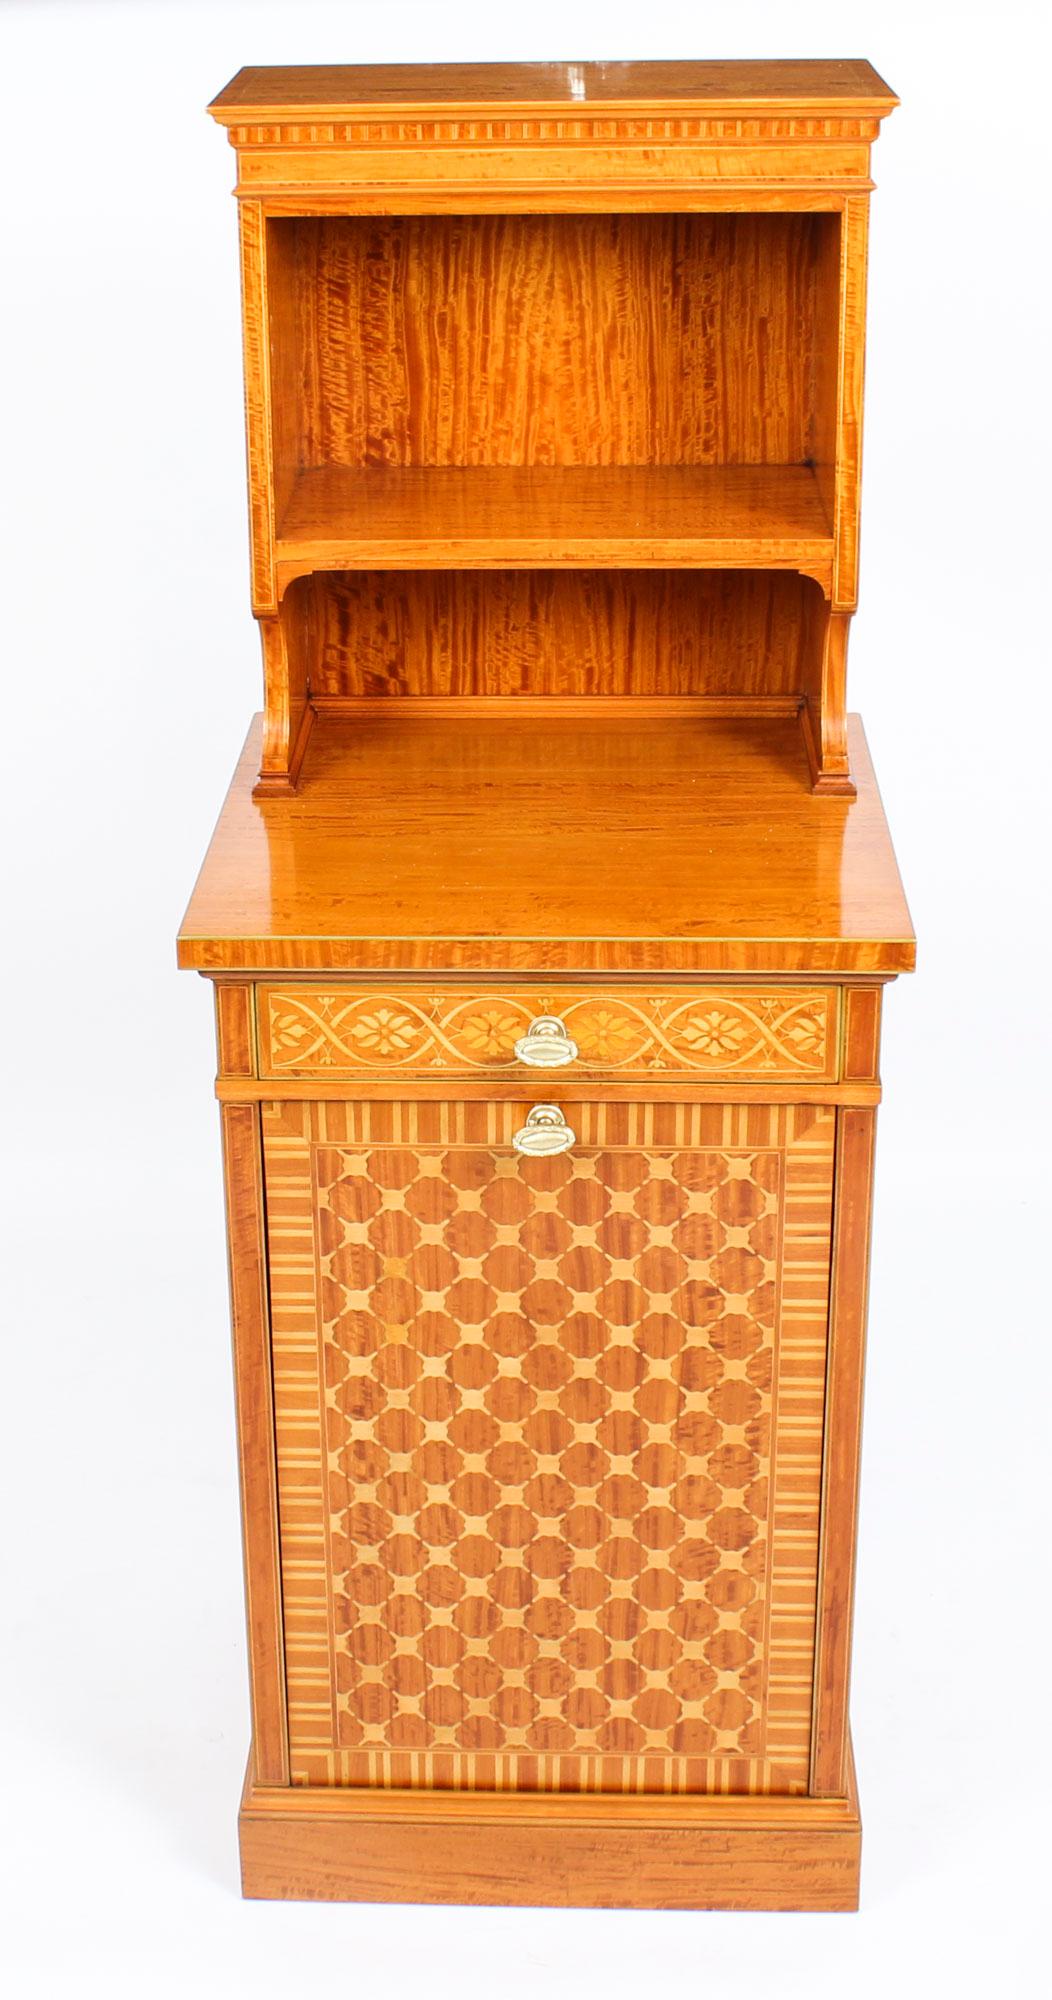 This is a fabulous Antique satinwood side cabinet with marquetry and parquetry decoration by Waring and Gillow, circa 1880 in date.

It has a decorative raised open back fitted with a shelf above a useful central drawer with a pull out cupboard